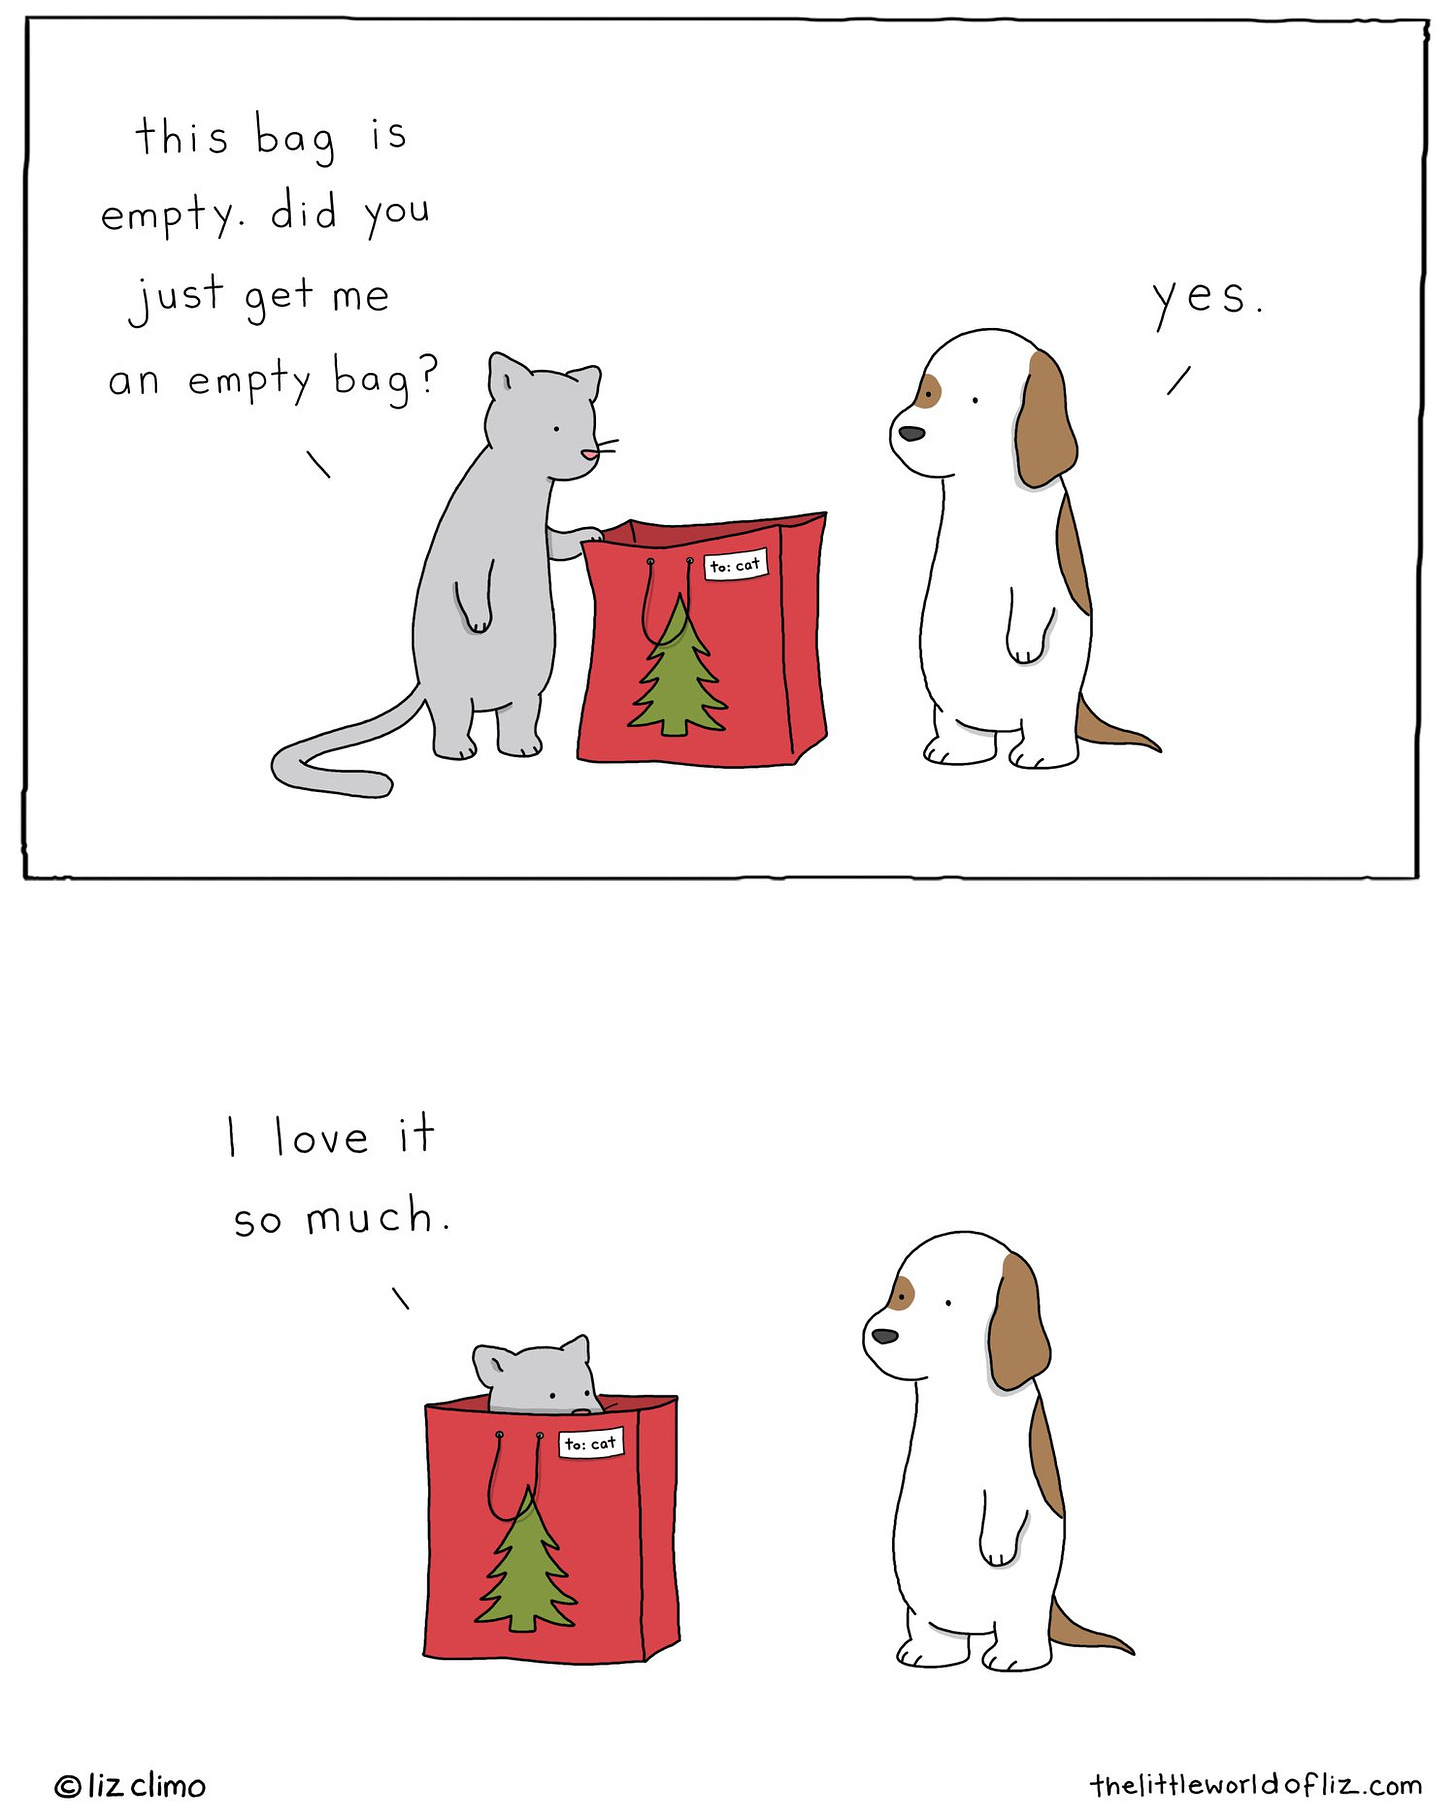 May be an image of text that says 'this bag is is empty. did you just get me an empty baq yes. to:cat love it so much. to:cat ©liz climo thelittleworldofliz.com'